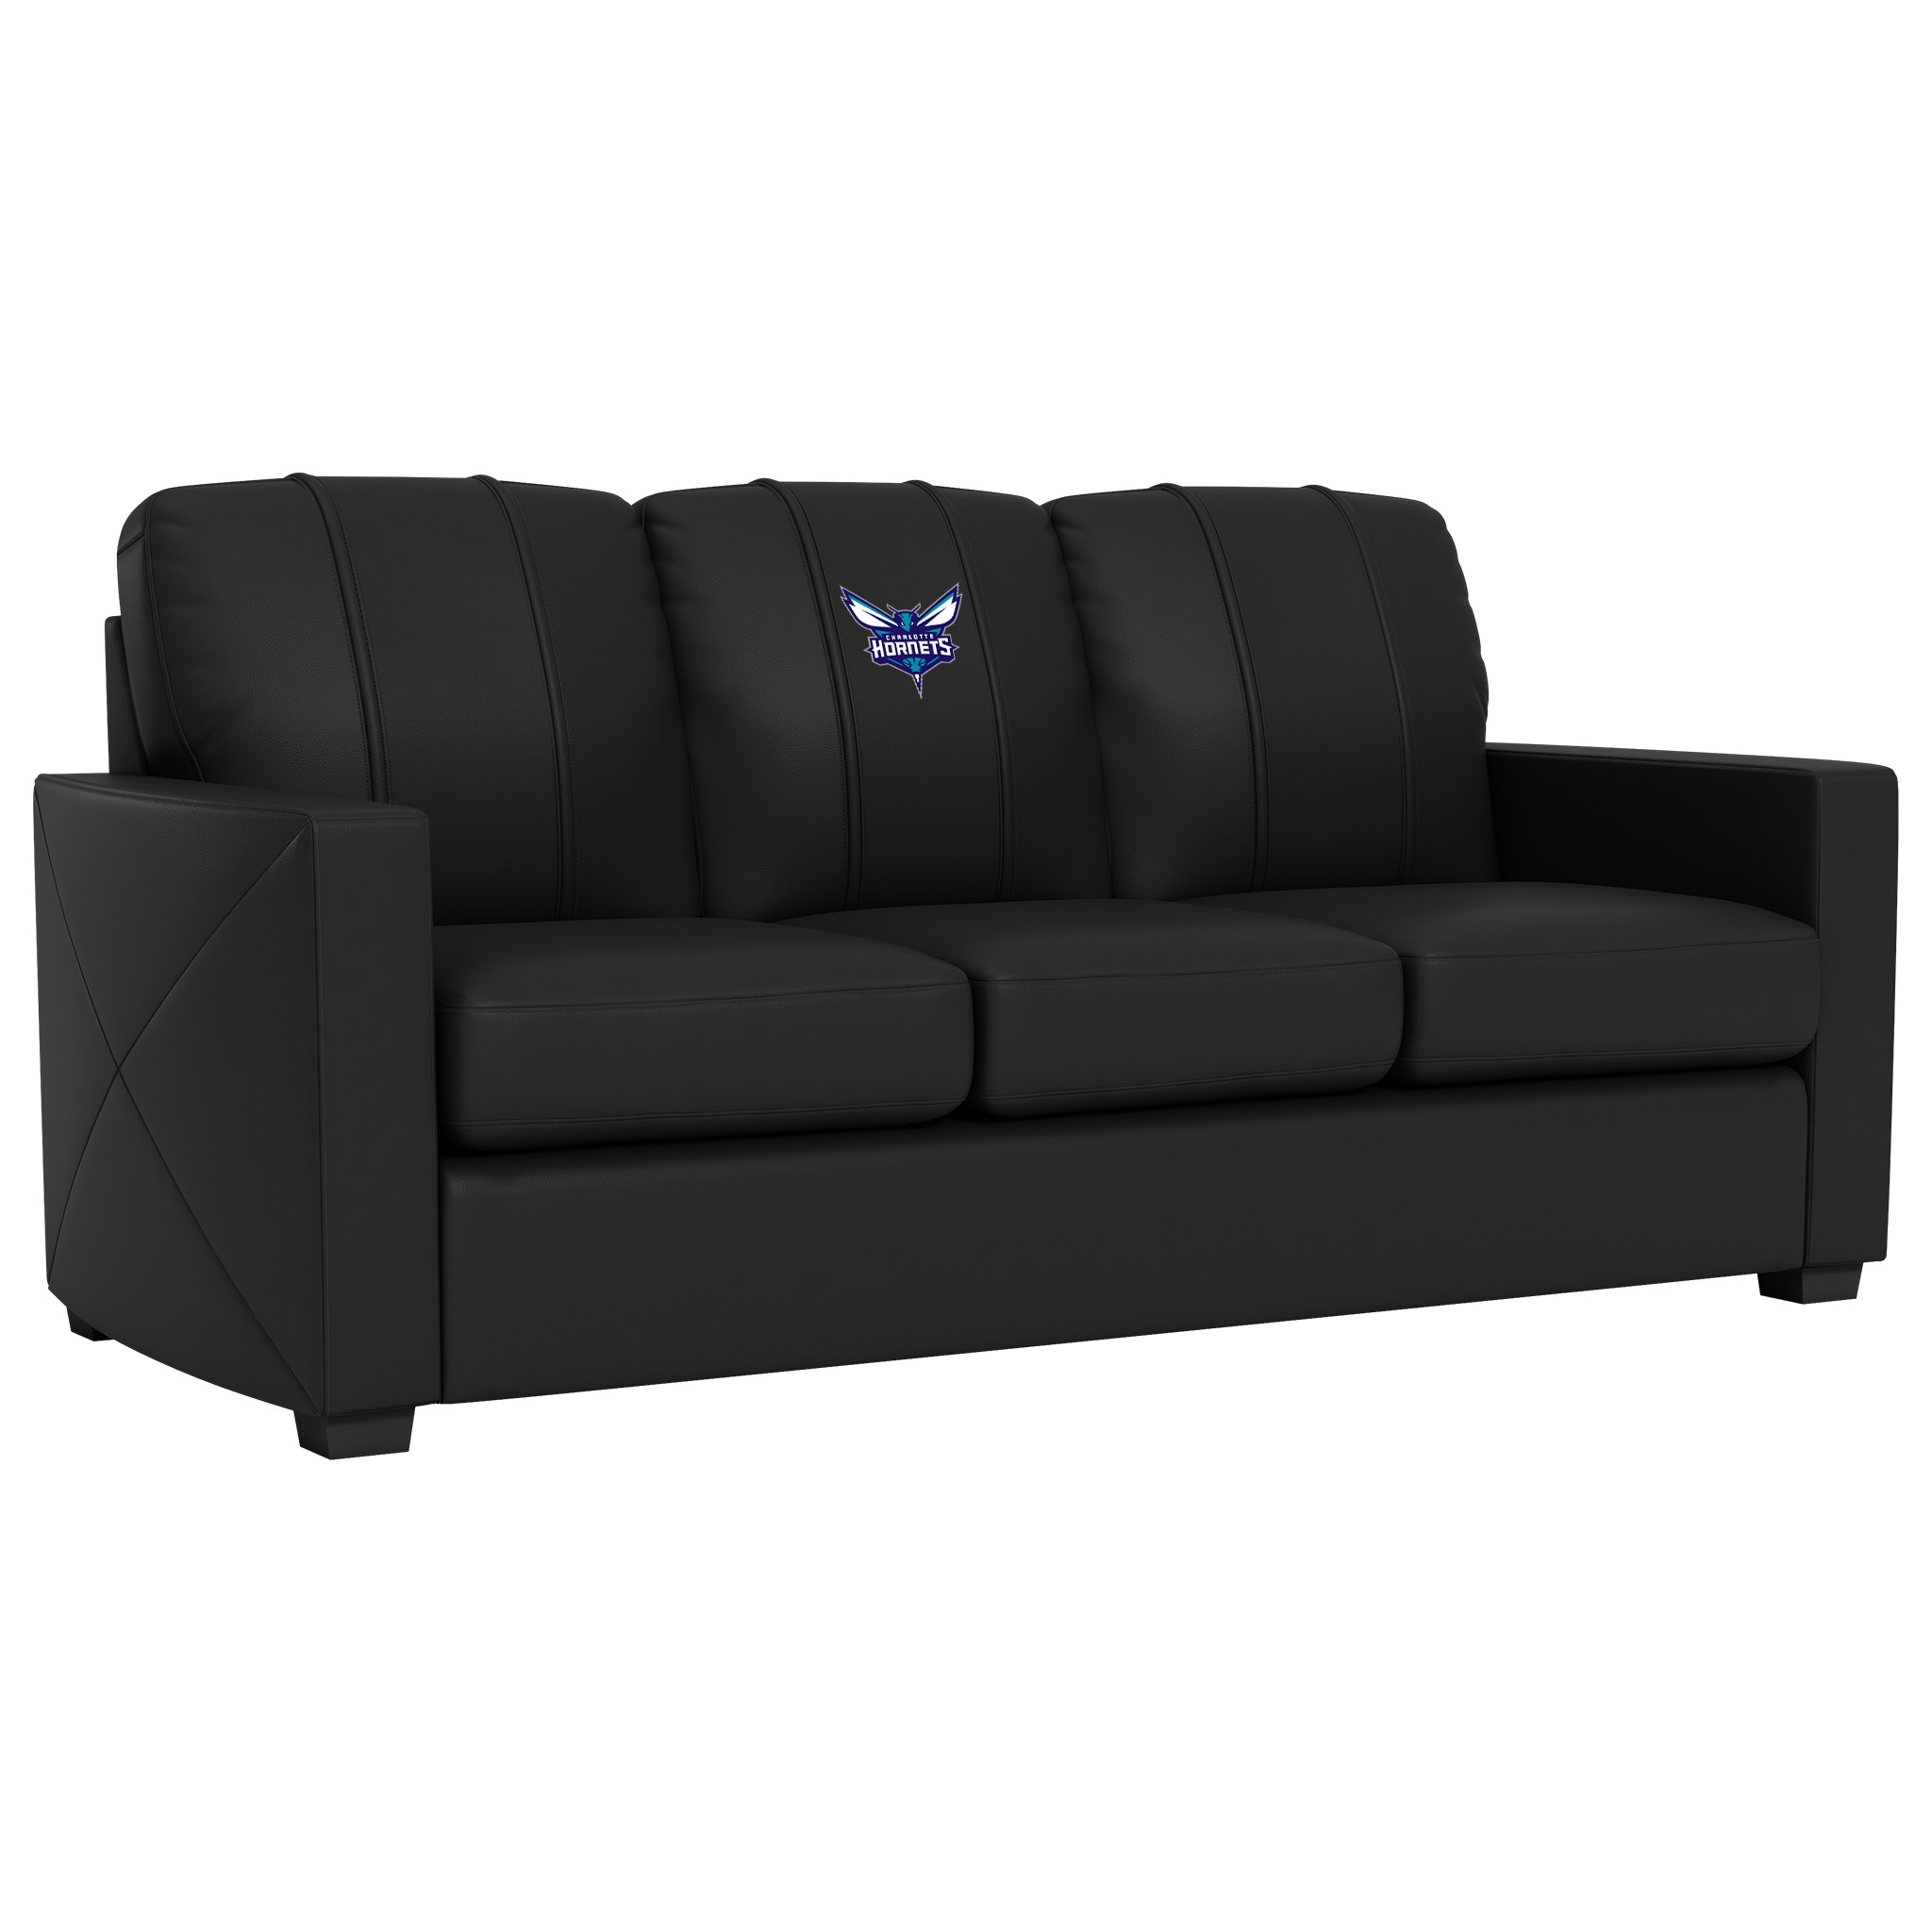 Charlotte Hornets Silver Sofa with Charlotte Hornets Primary